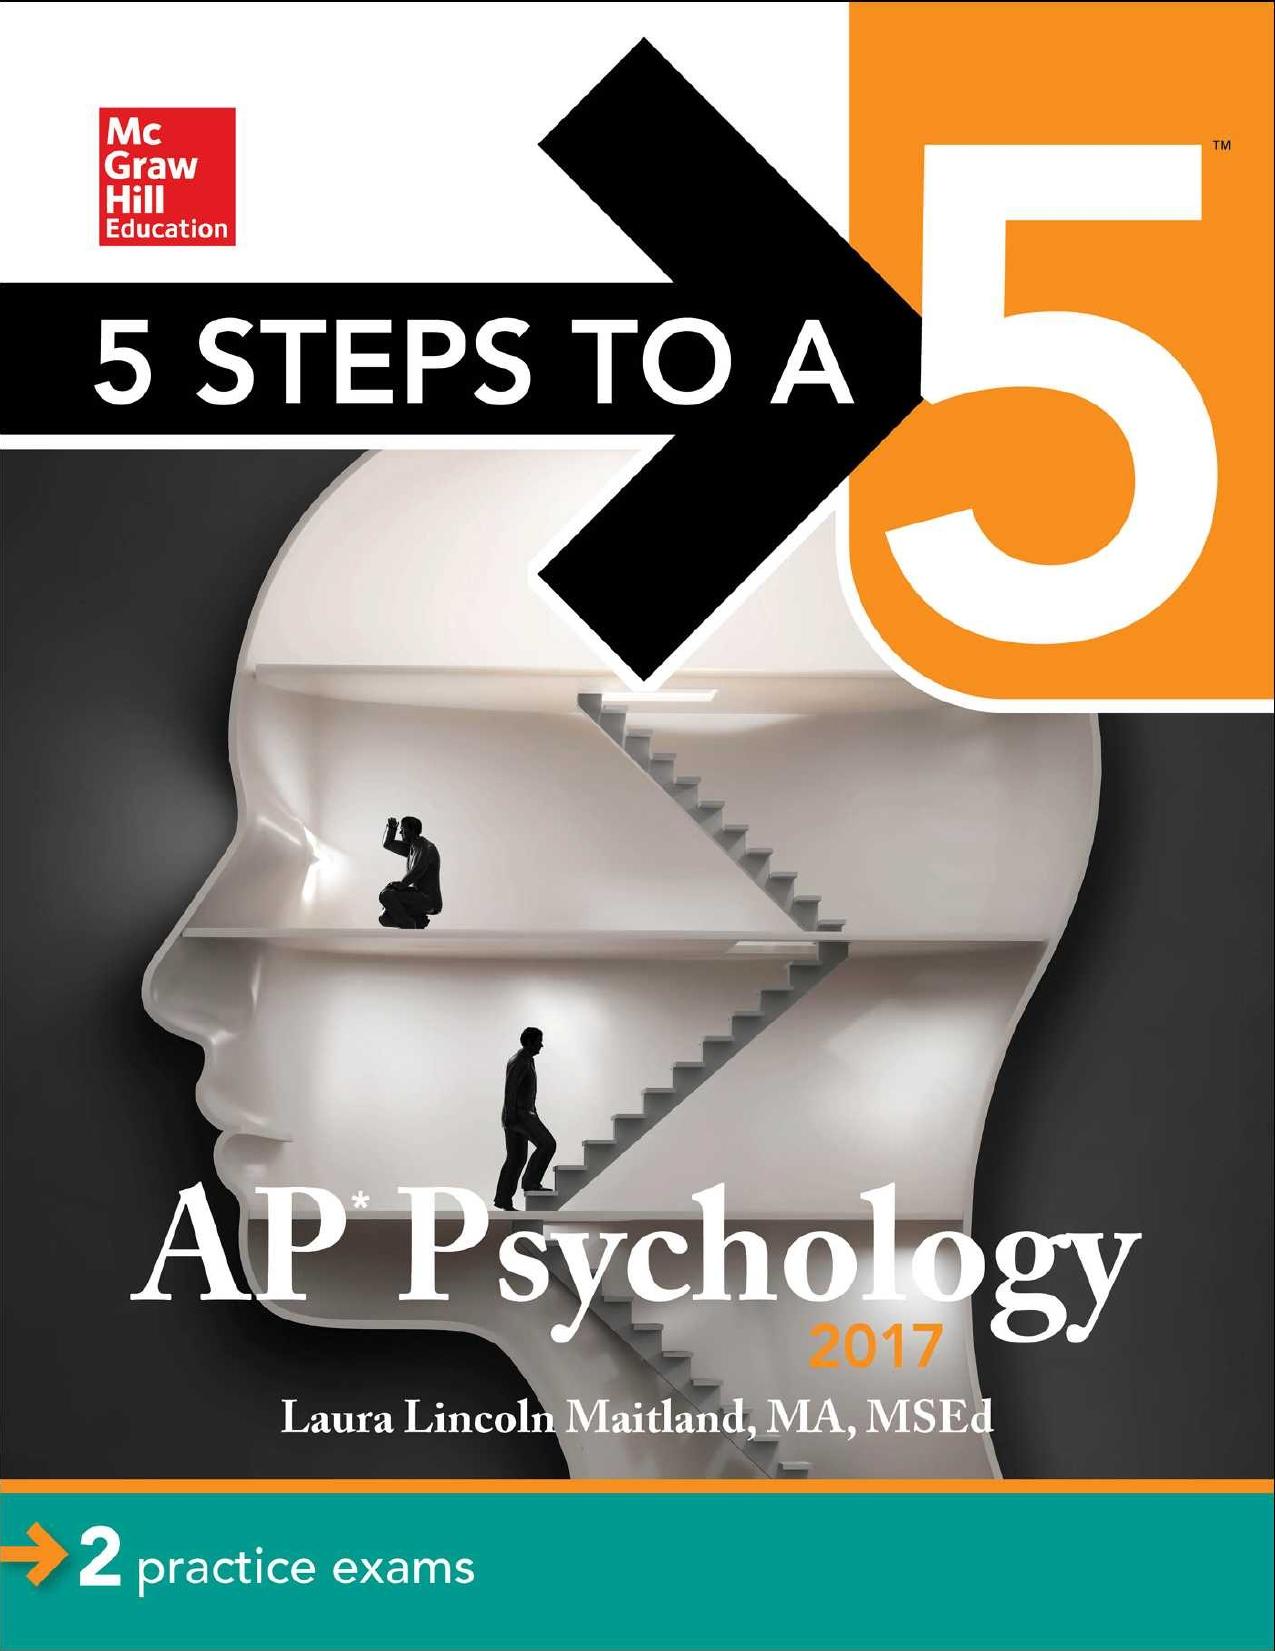 5 Steps to a 5 AP Psychology 2017 by Laura Lincoln.jpg